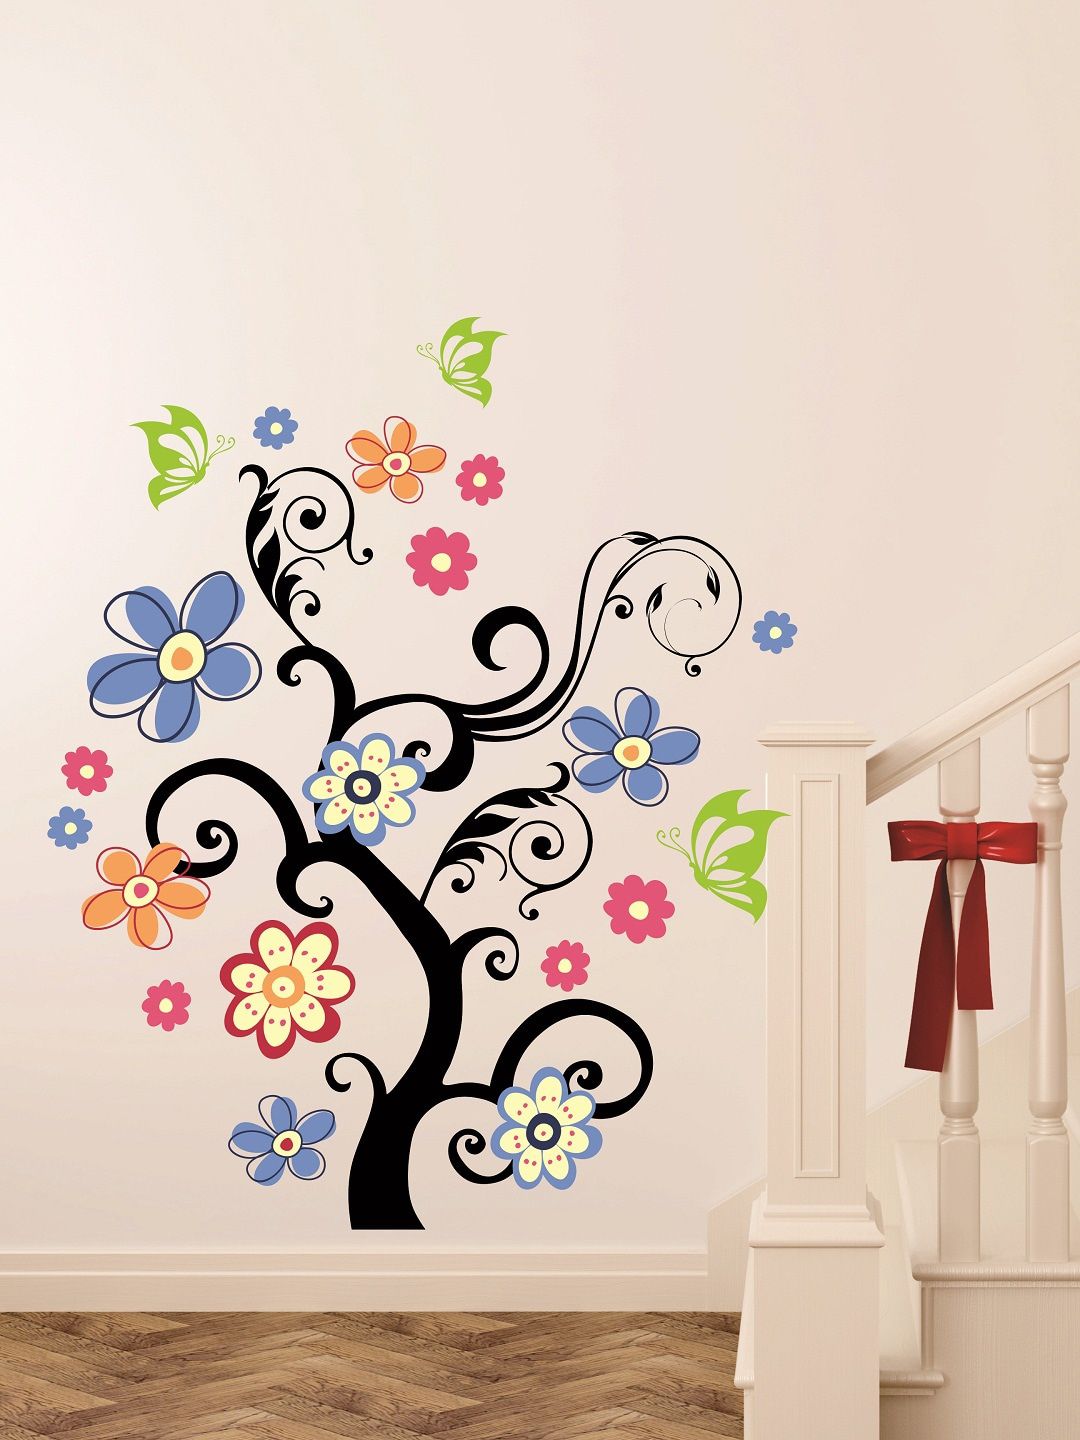 WALLSTICK Black & Blue Floral Large Vinyl Wall Sticker Price in India